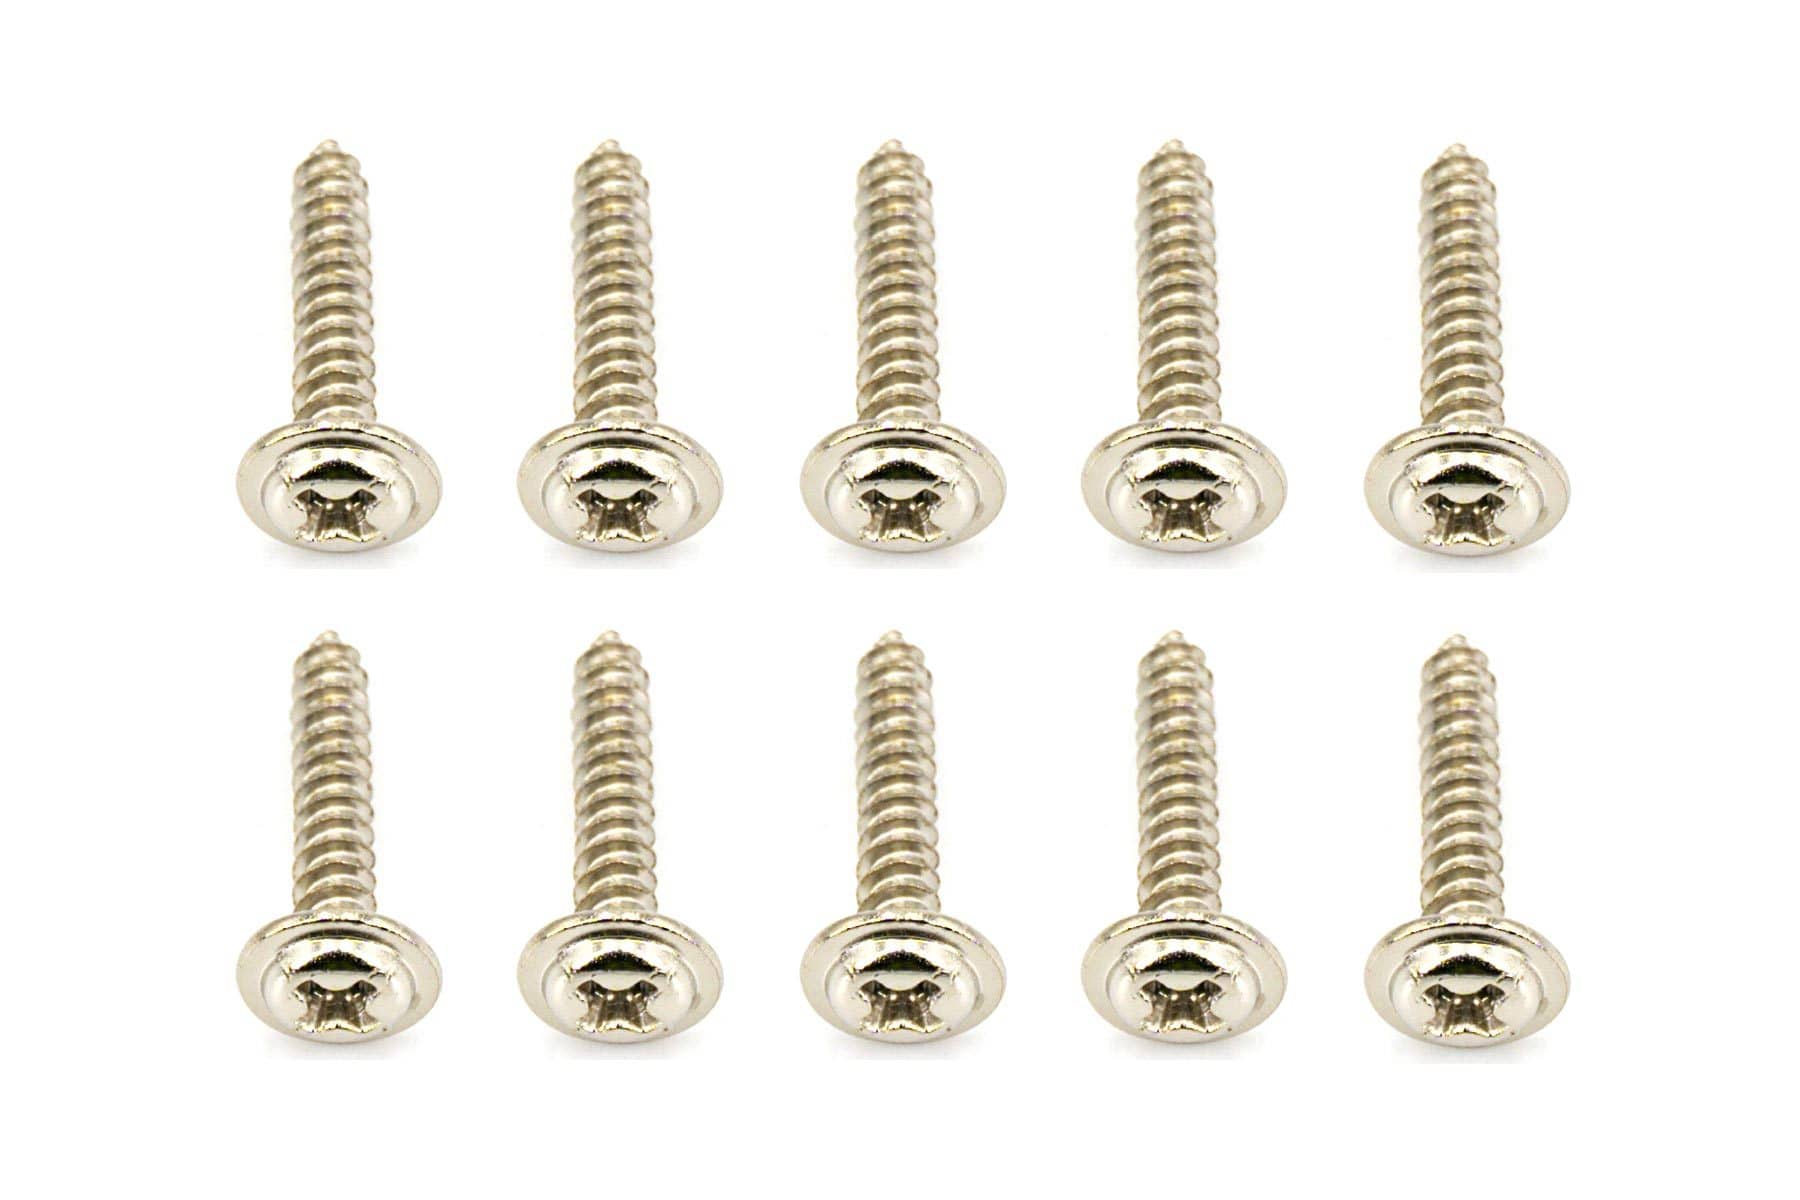 BenchCraft 3mm x 16mm Self-Tapping Washer Head Screws (10 Pack) BCT5040-052